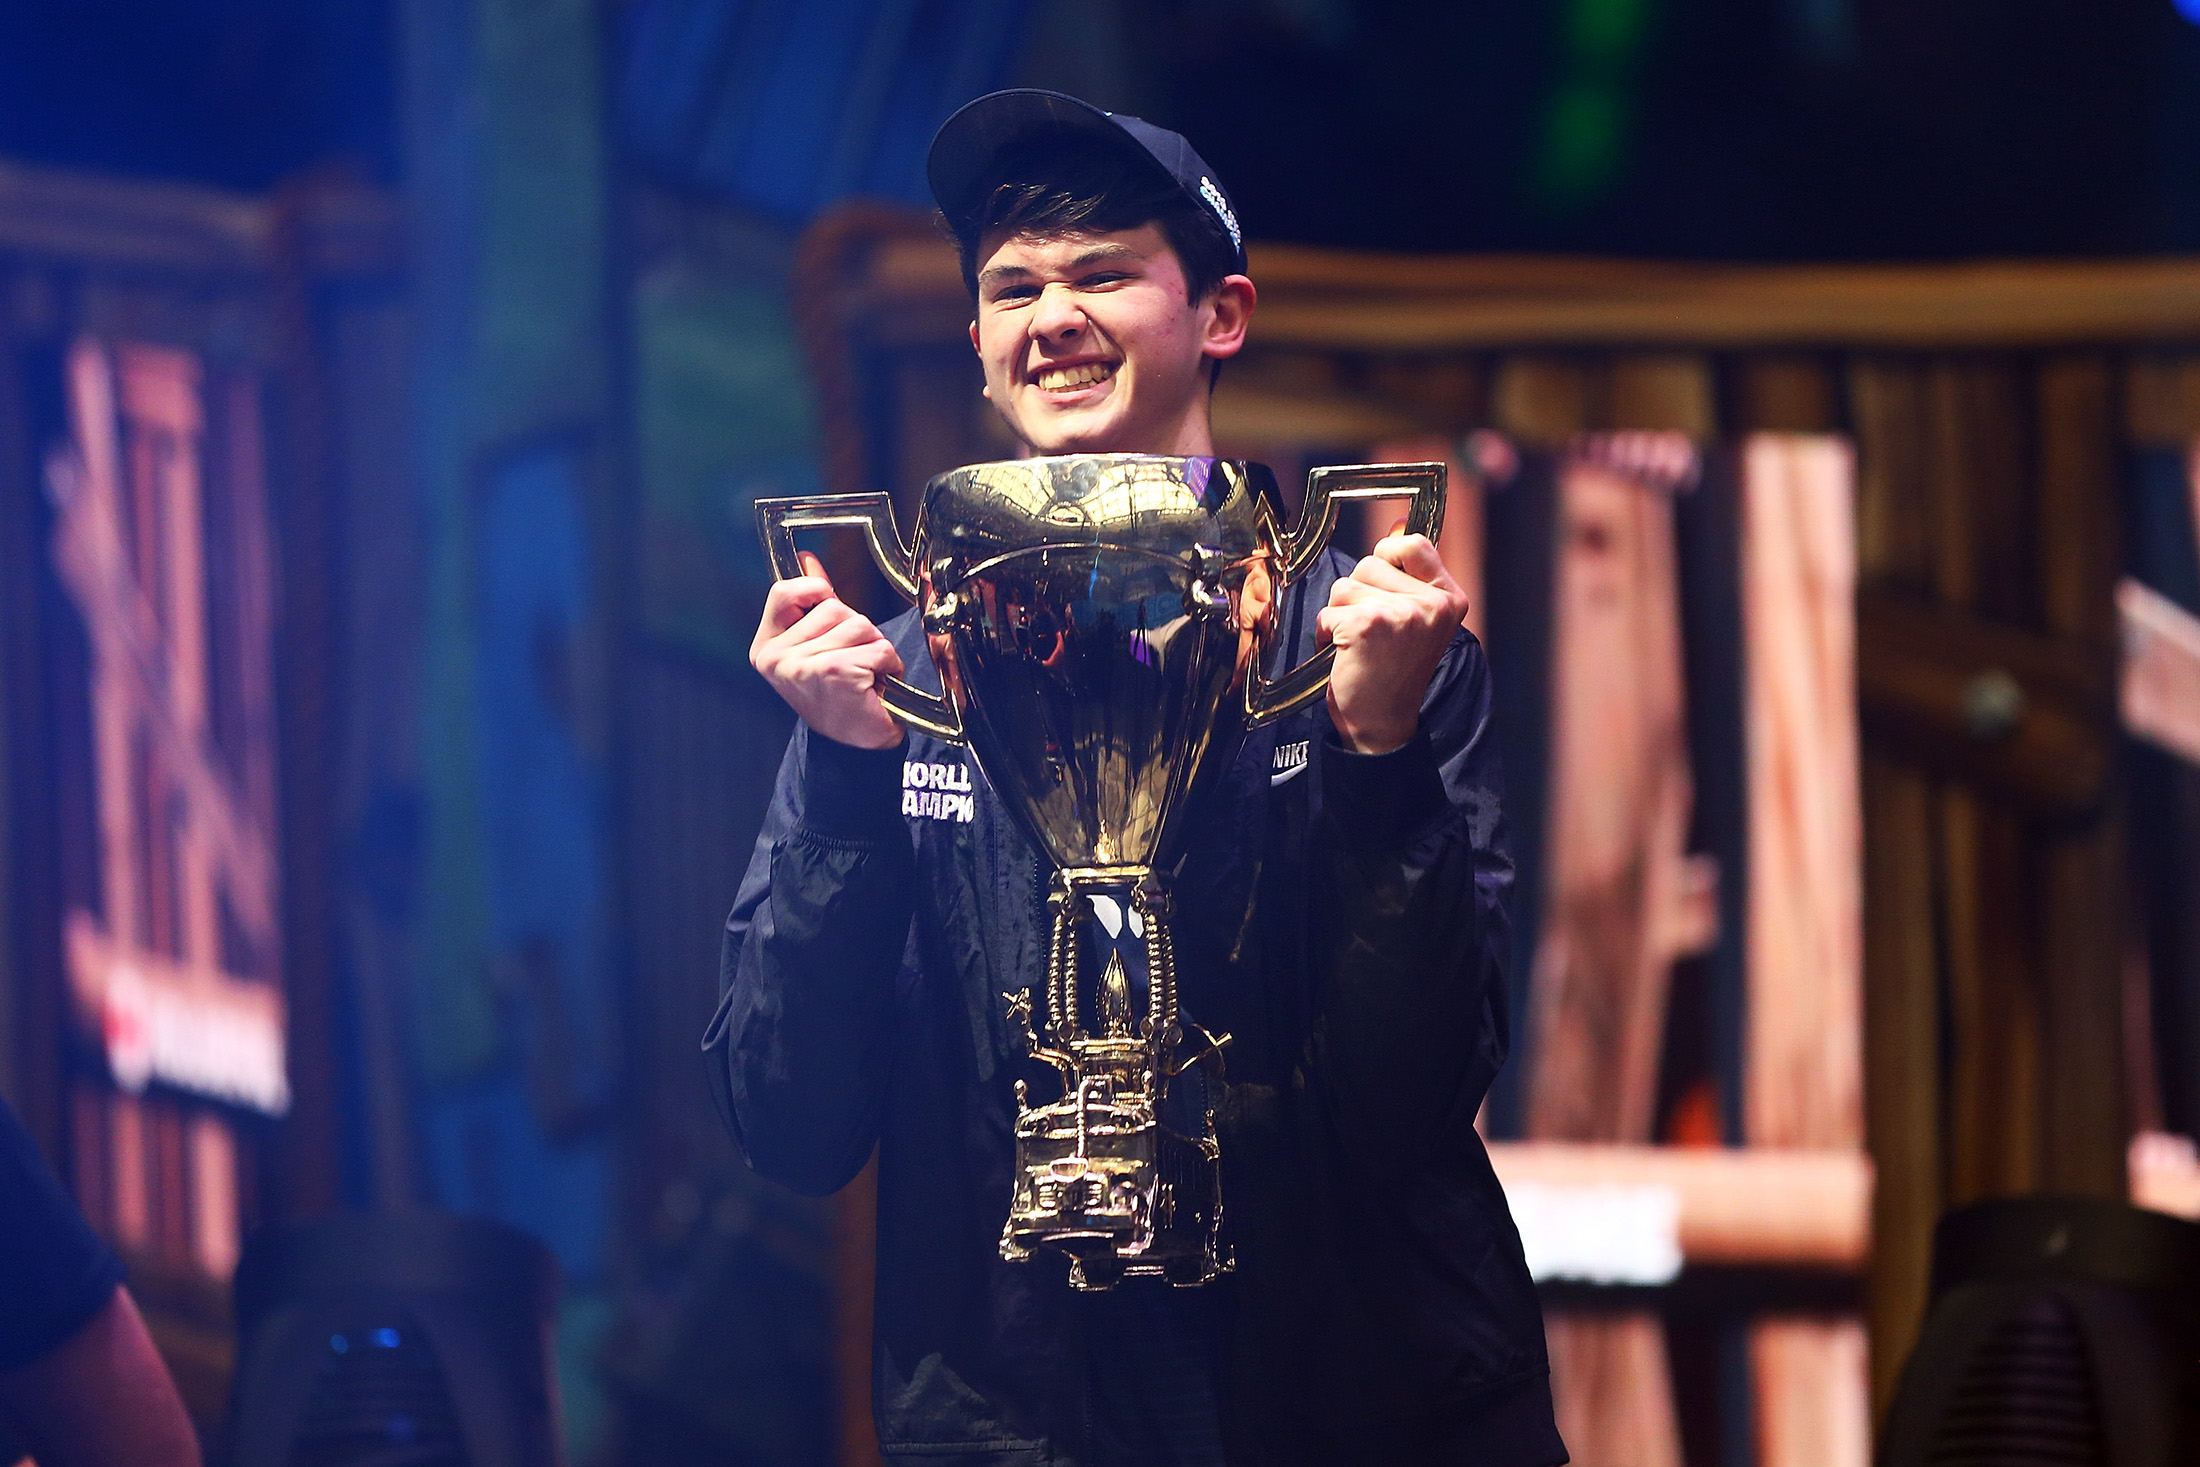 This Fortnite World Cup Winner Is 16 and $3 Million Richer - The